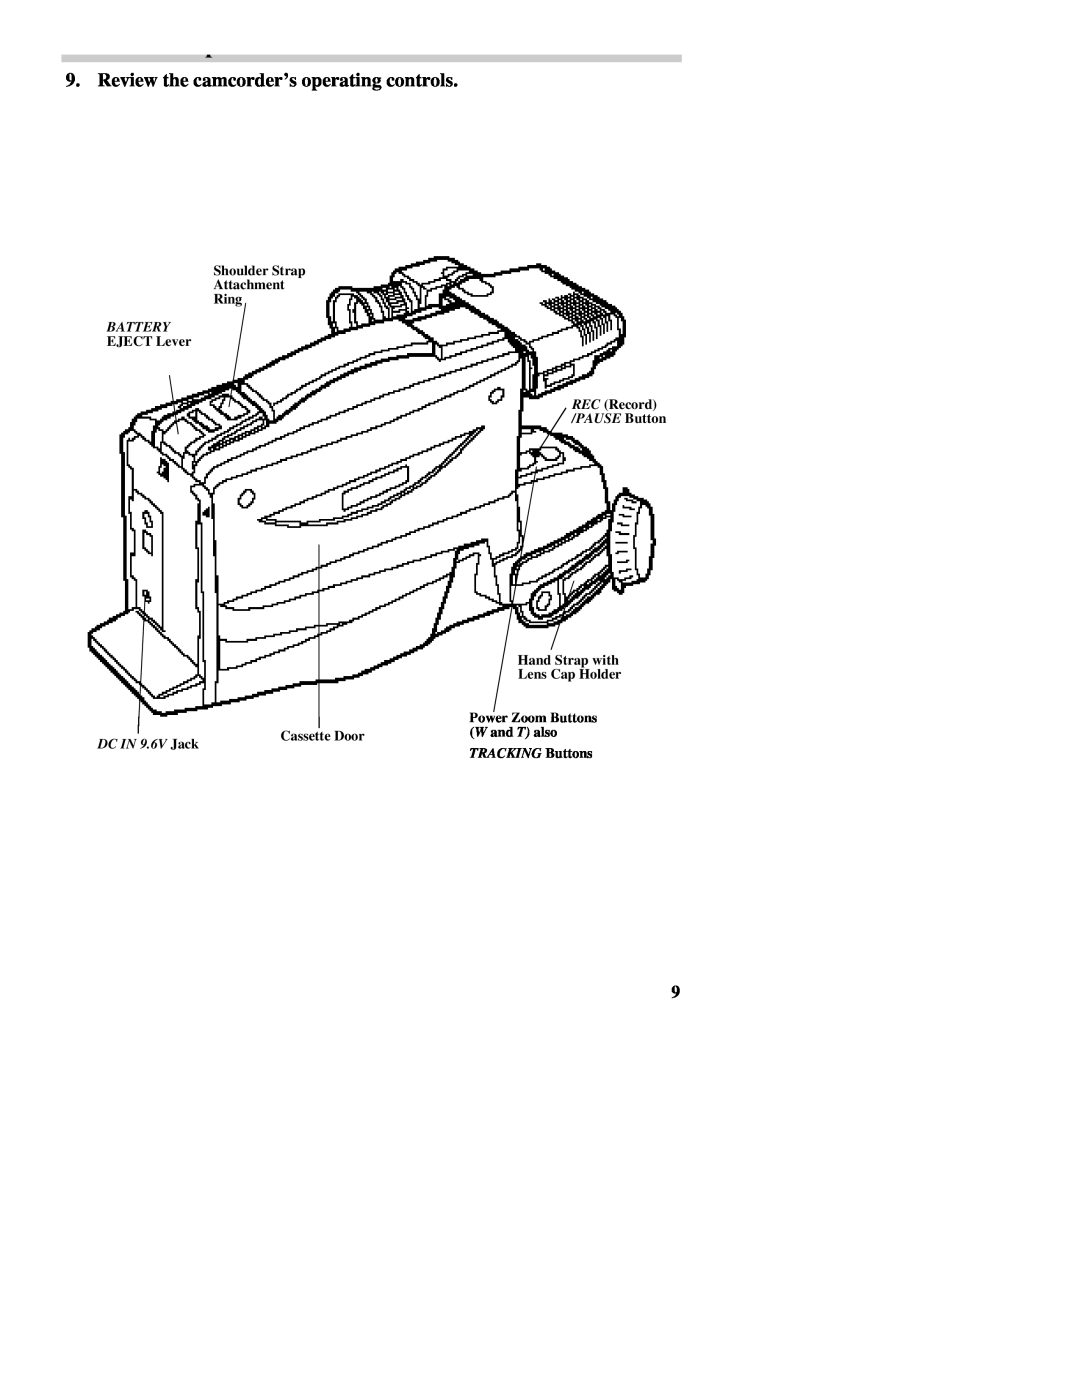 RCA CC437 manual Review the camcorder’s operating controls, Shoulder Strap Attachment Ring, EJECT Lever, Cassette Door 